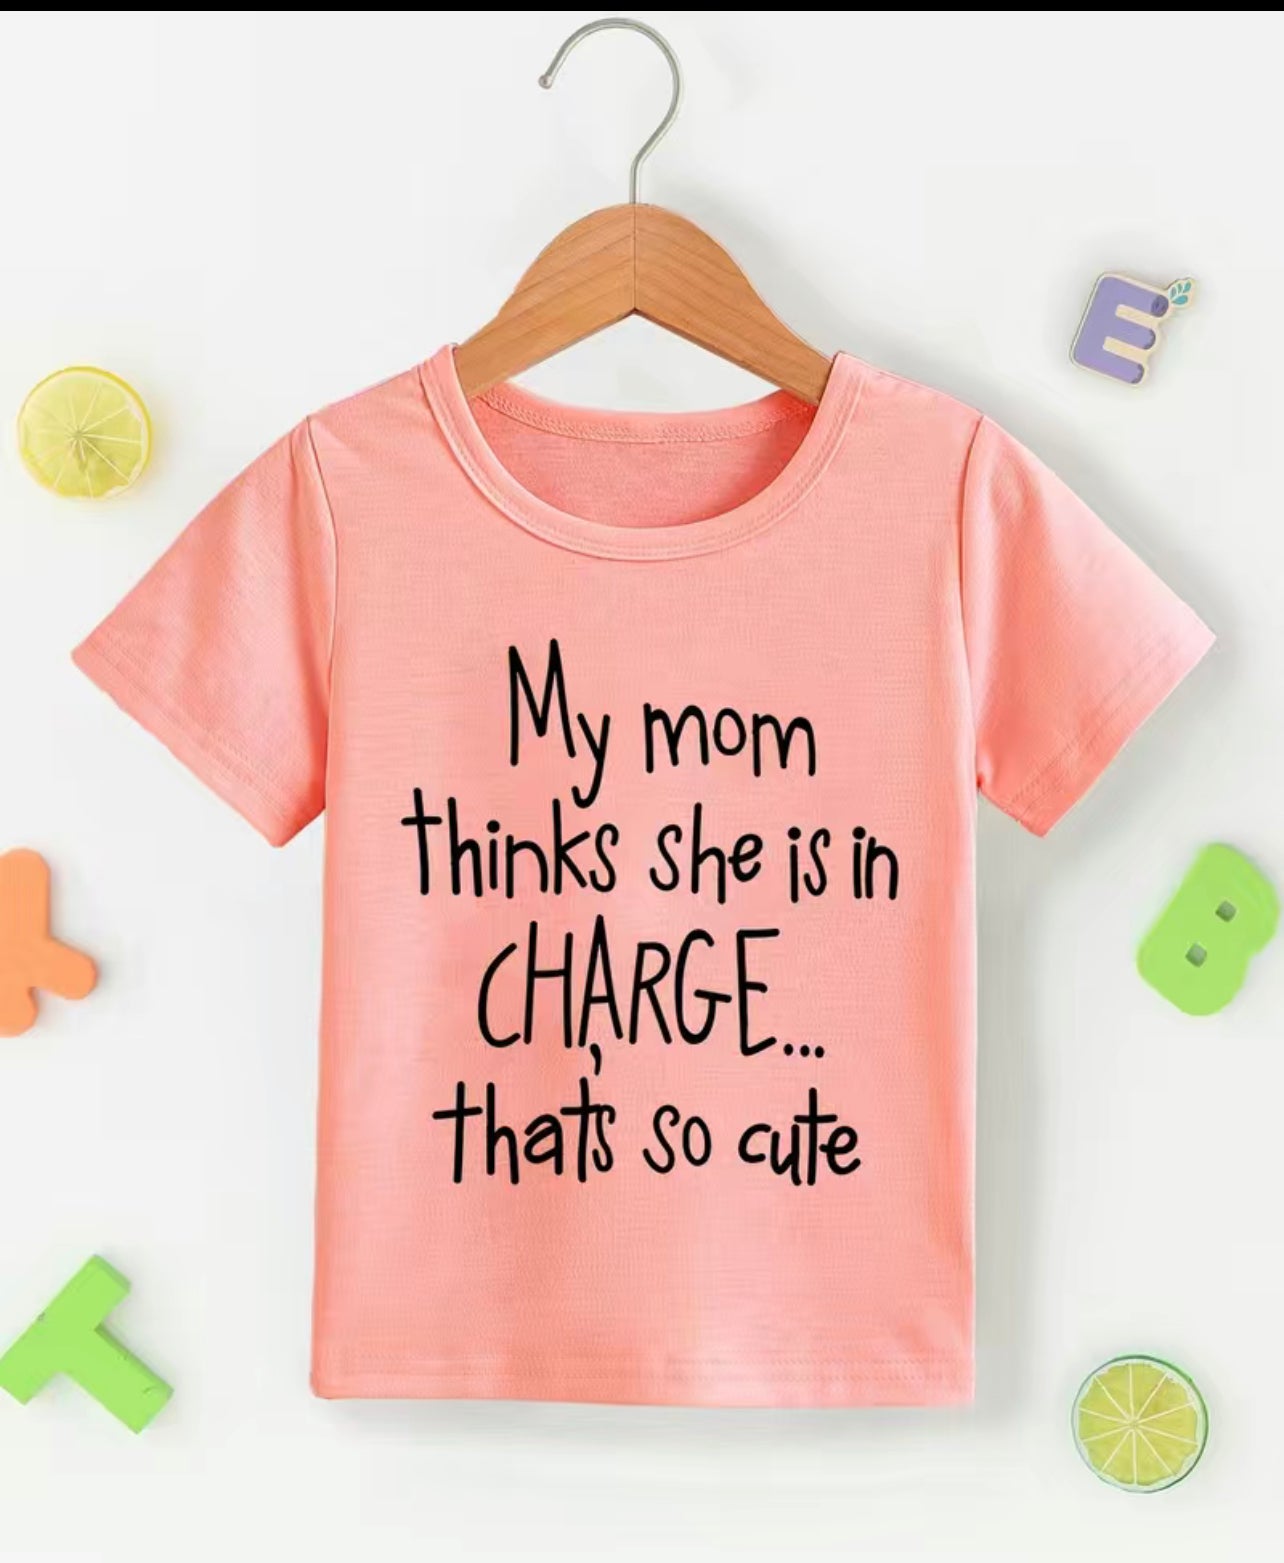 “My Mom Thinks She’s in Charge, That’s so Cute” casual T-Shirt! 